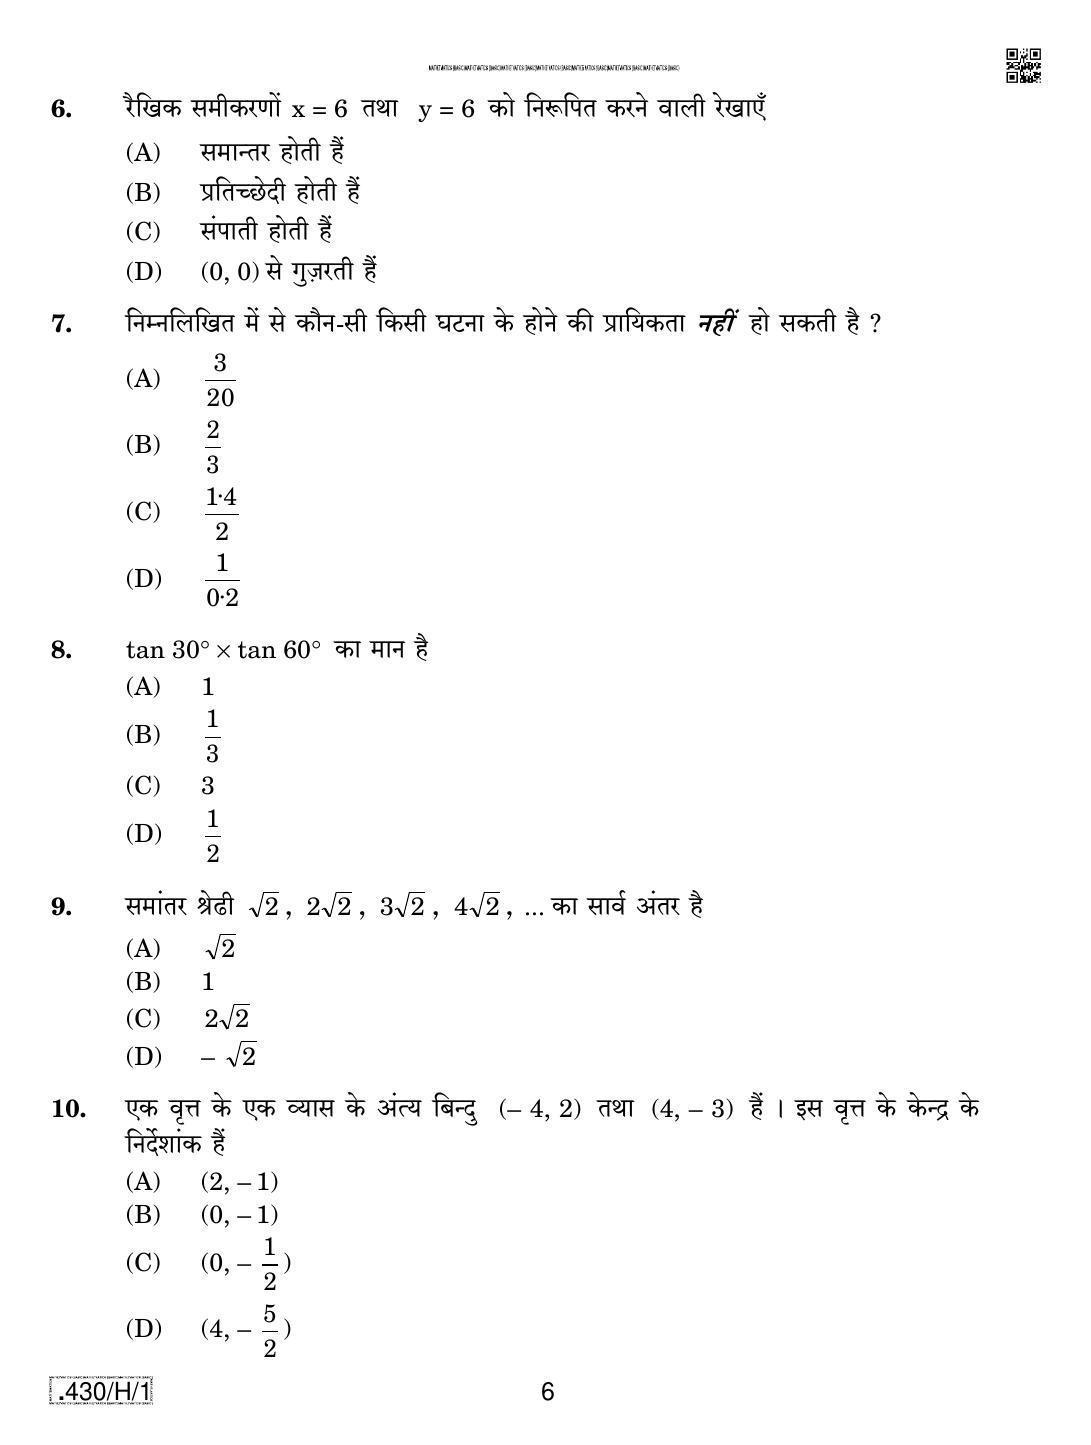 CBSE Class 10 430-C-1 - Maths (Basic) 2020 Compartment Question Paper - Page 6